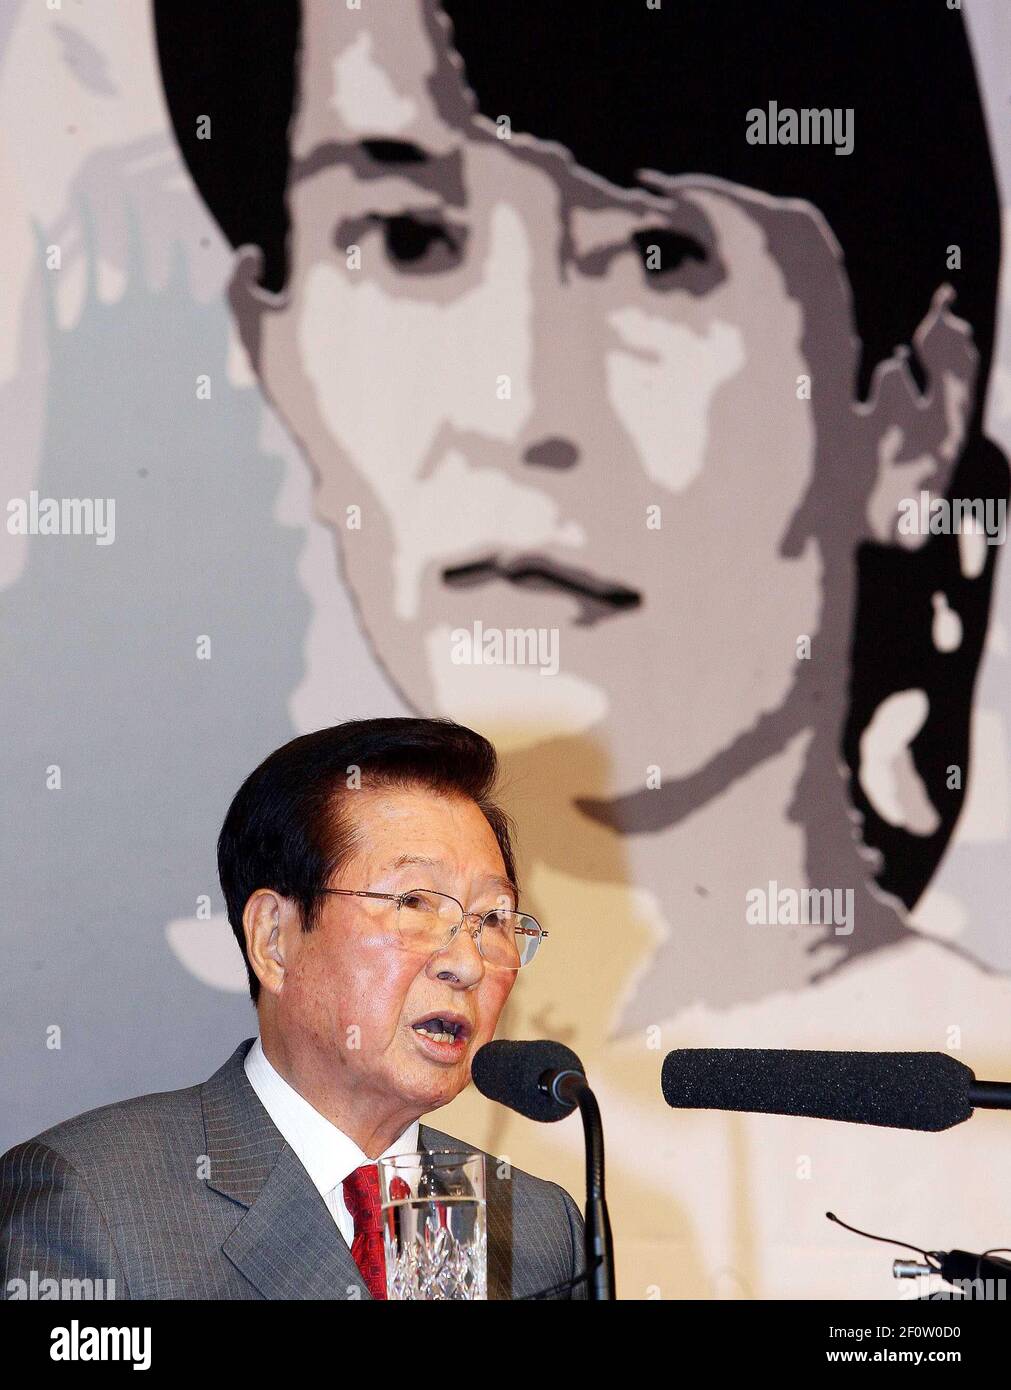 4 December 2007 - Seoul, South Korea - South Korean former president Kim Dae-jung, gives a speech in commemoration of the 7th anniversary of former president Kim Dae-jung's winning the 2000 nobel peace prize at 'A Night for Democracy in Burma'. Kim Dae-jung, supports Burma's Aung San Suu Kyi U.S $ 40,000 and democratization of Burma. Photo Credit: Youngho Lee/Sipa Press /0806301301 Stock Photo